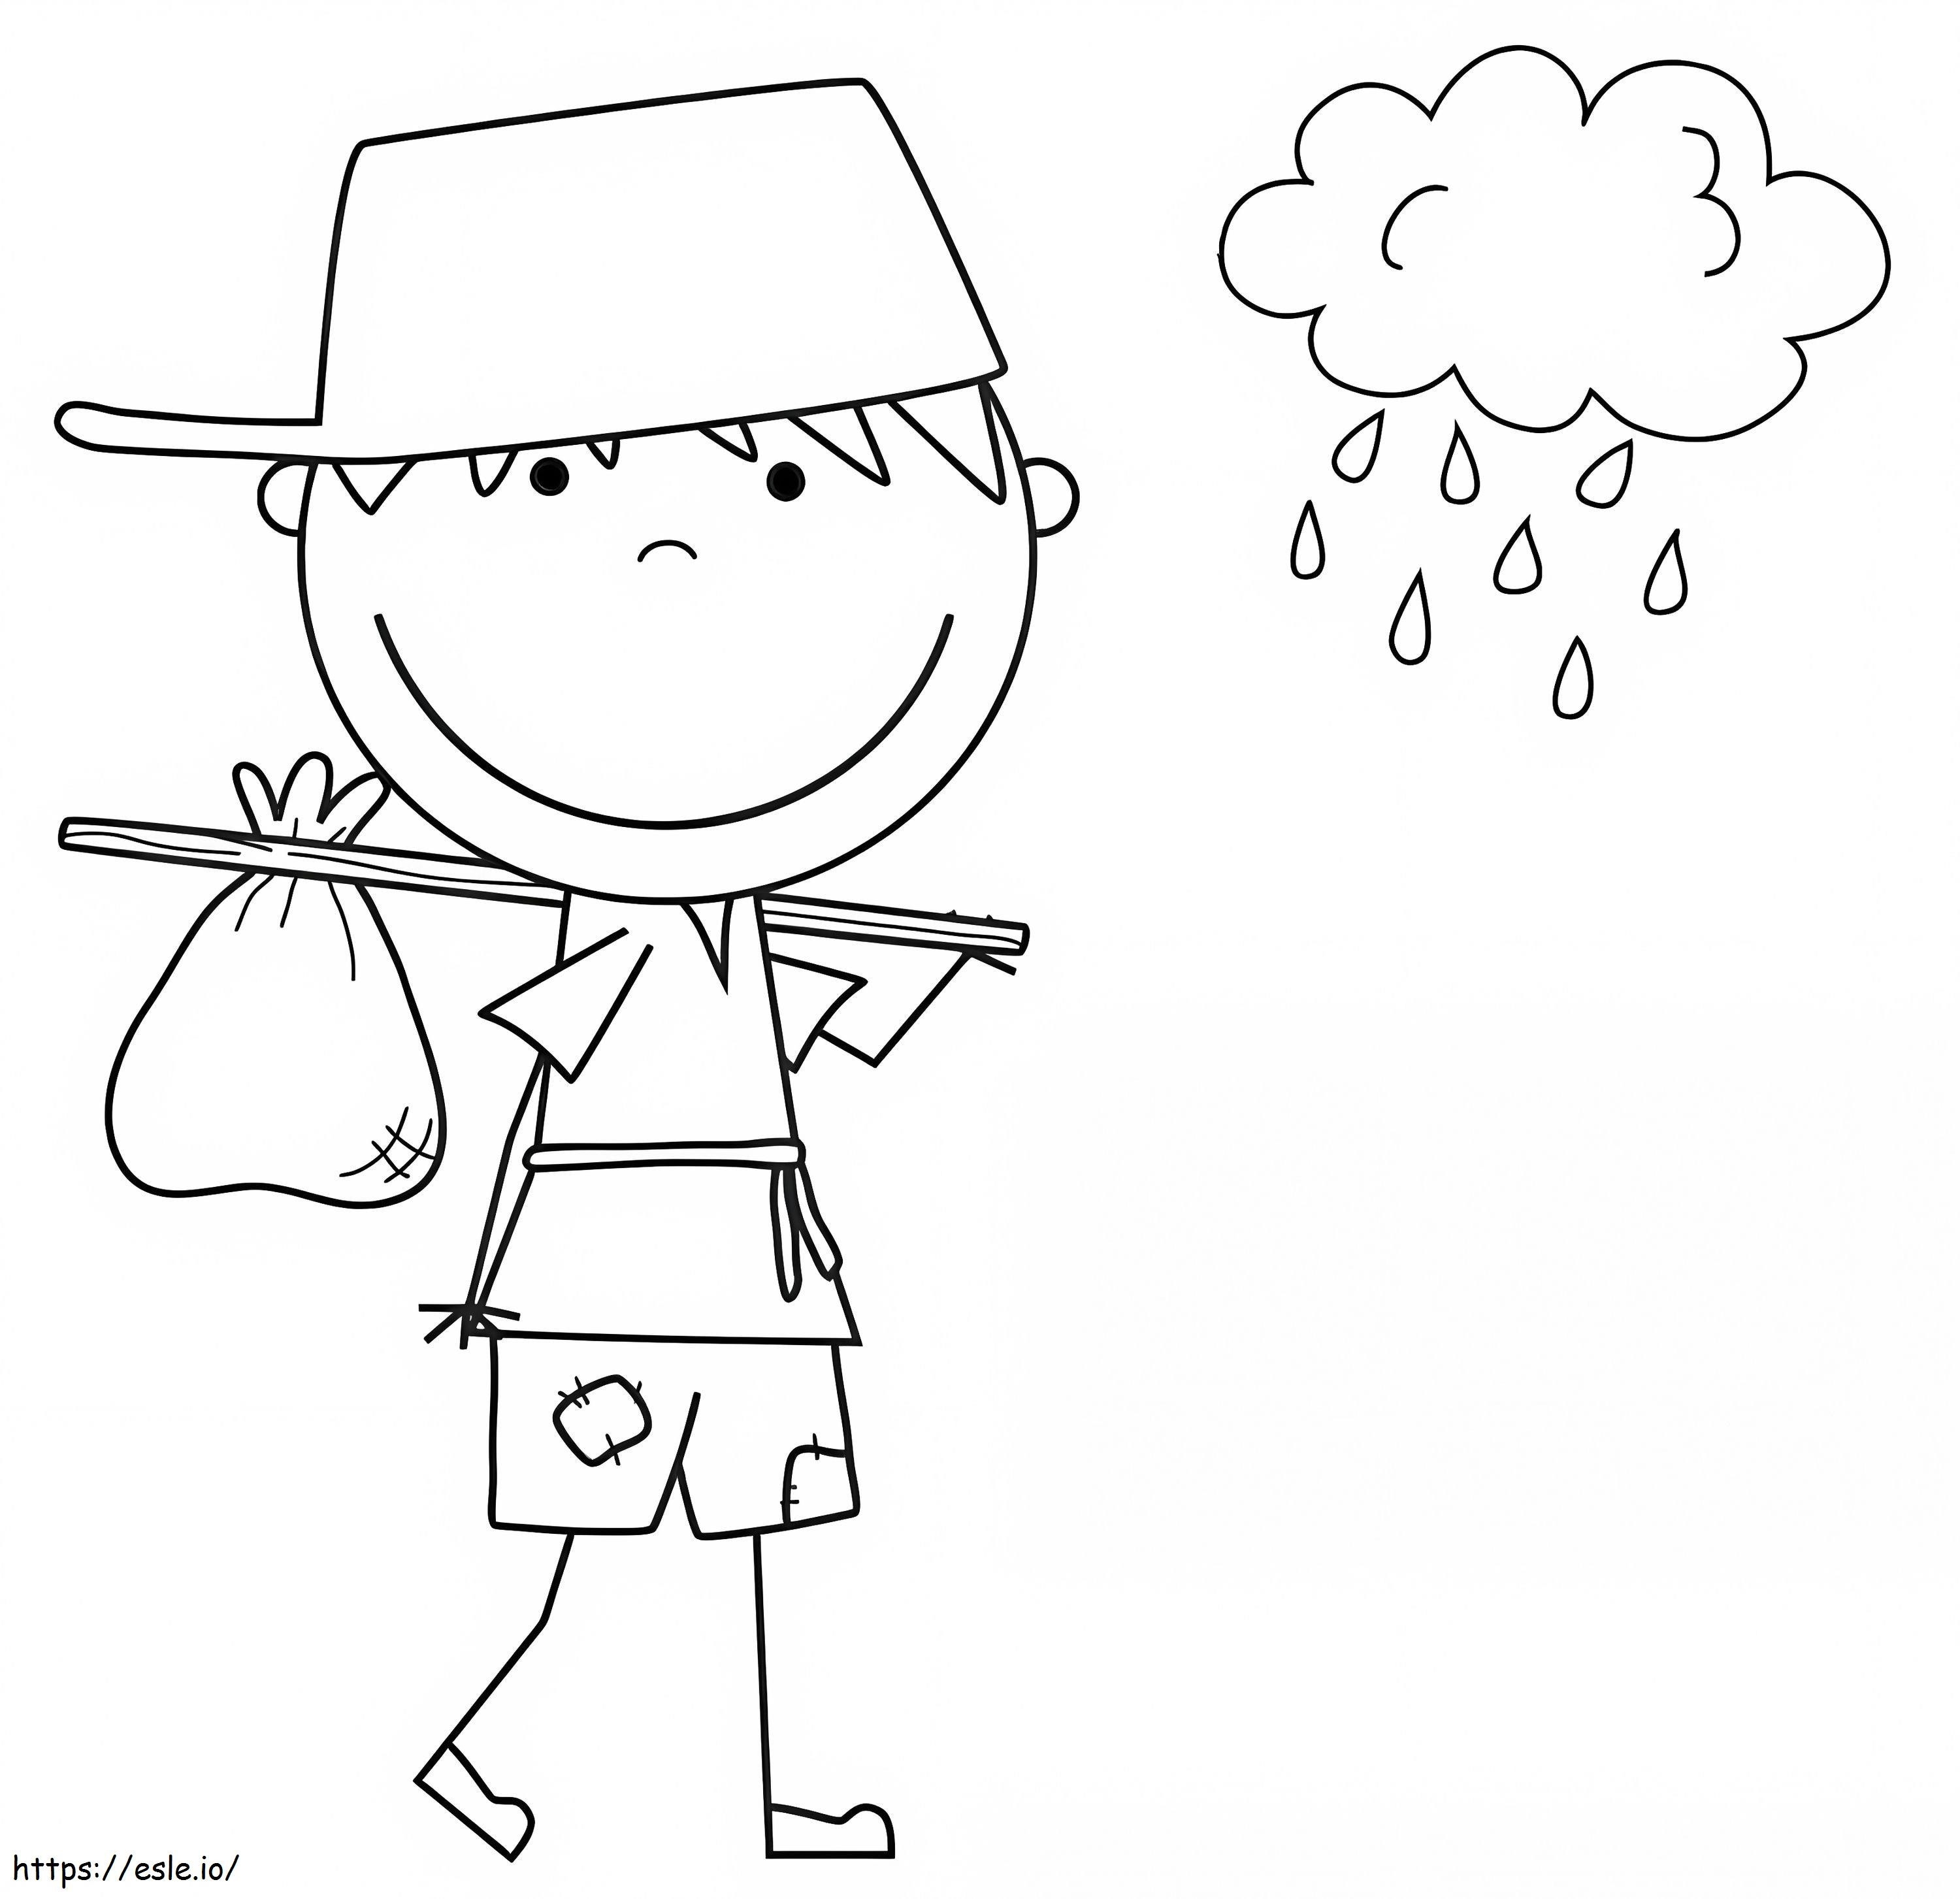 Johnny Appleseed Travel coloring page